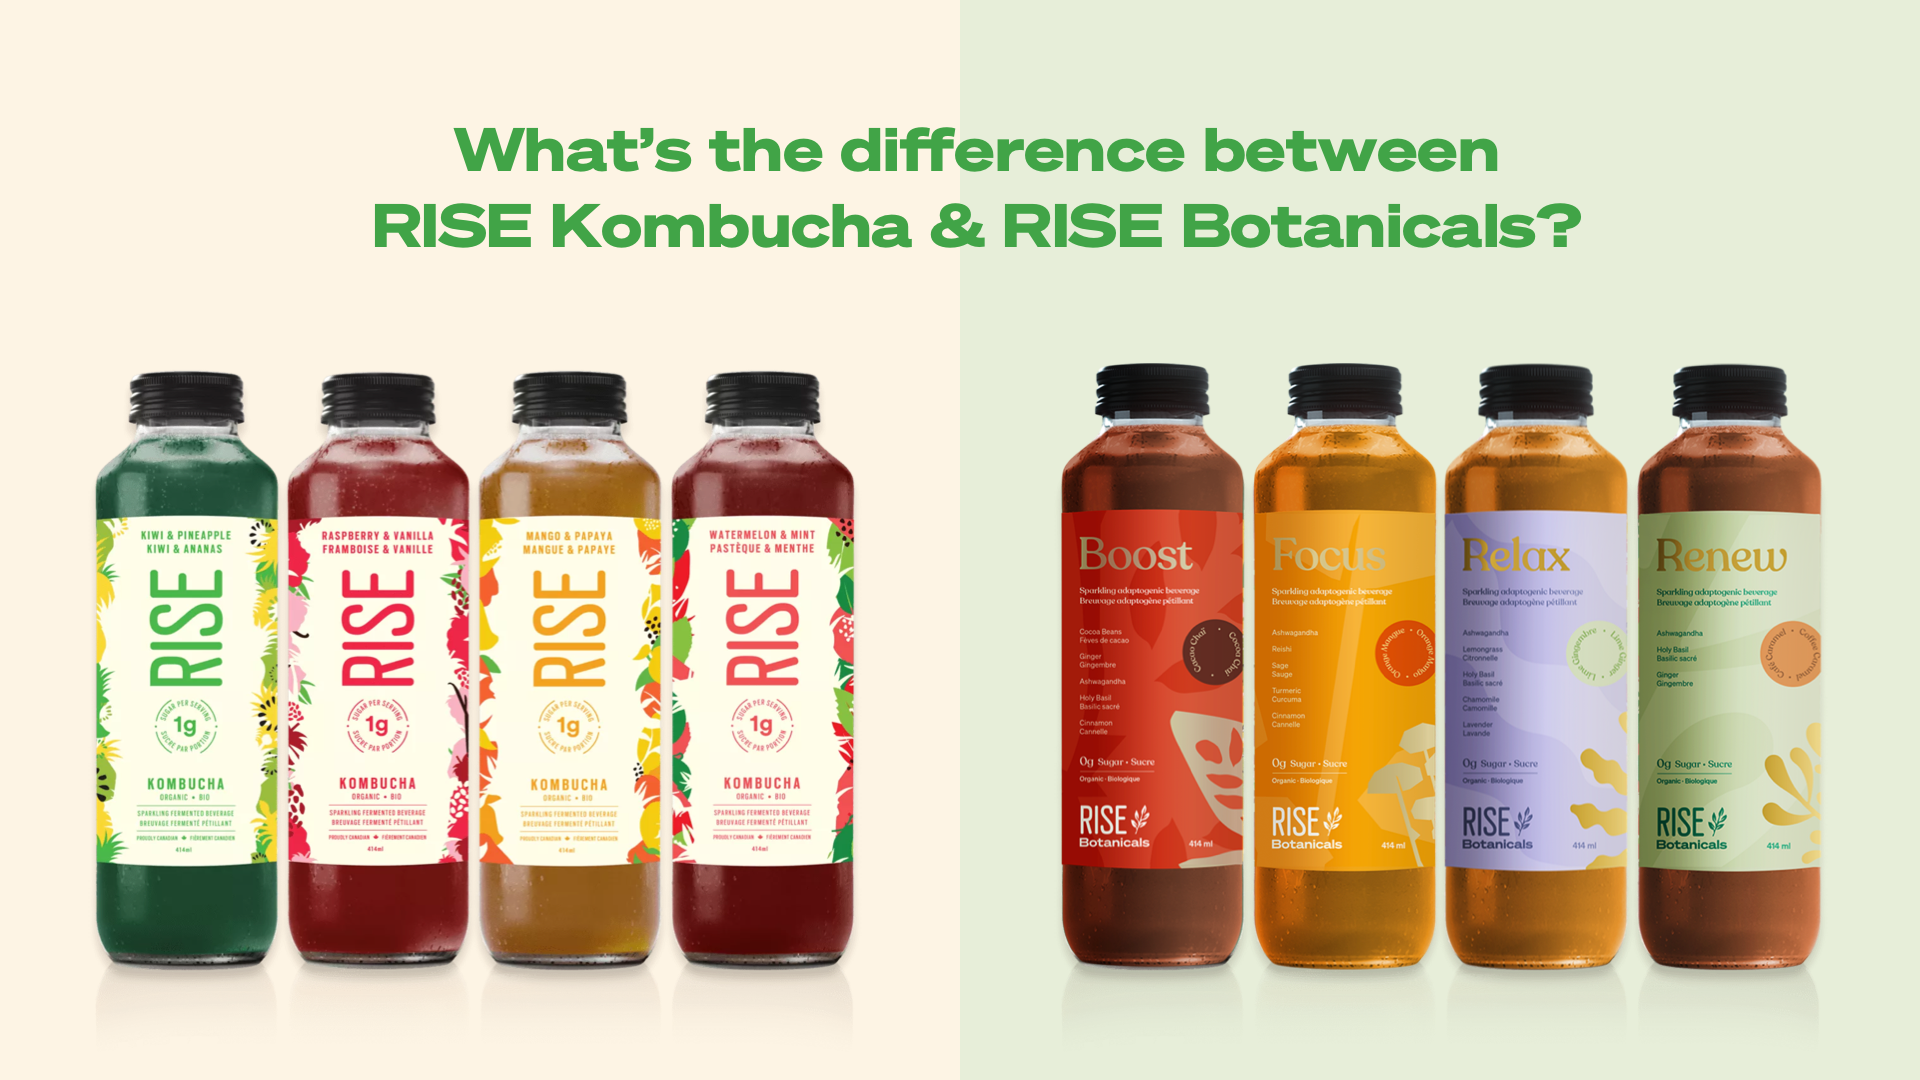 2. What’s the Difference Between RISE Kombucha & RISE Botanicals?